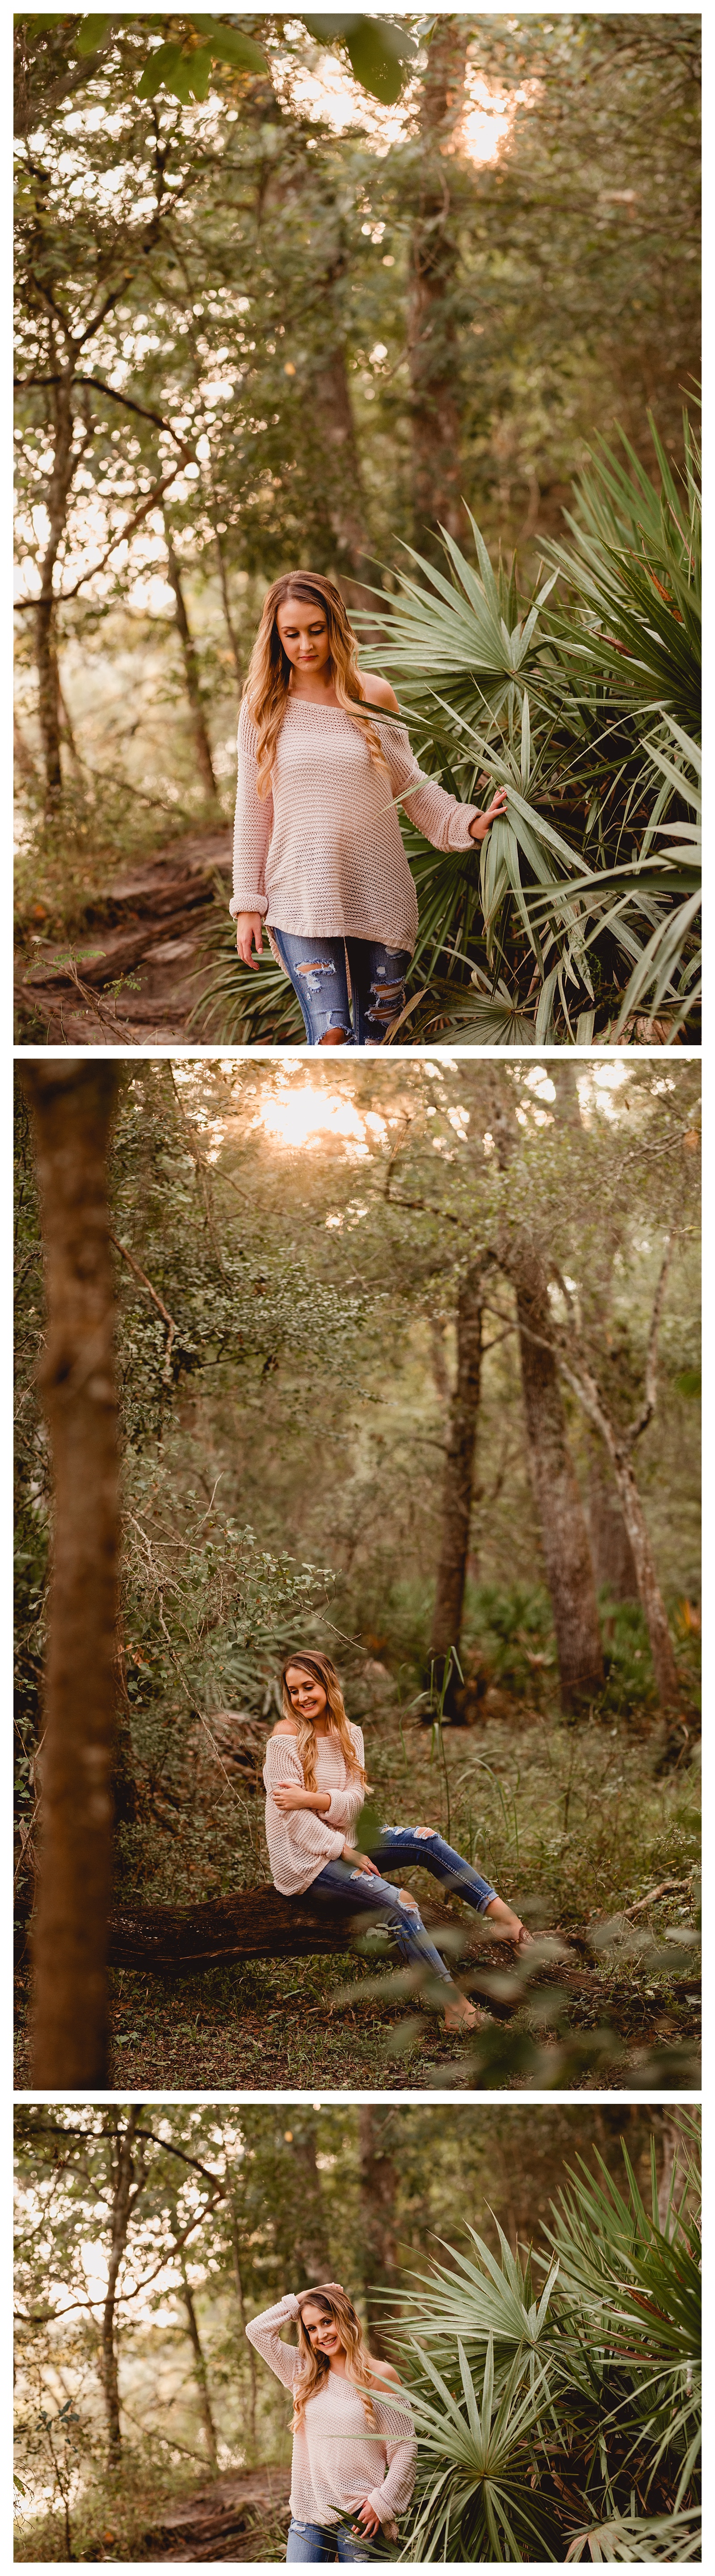 Woodsy and candid senior portraits by professional photographer in Tallahassee, Florida. Shelly Williams Photography